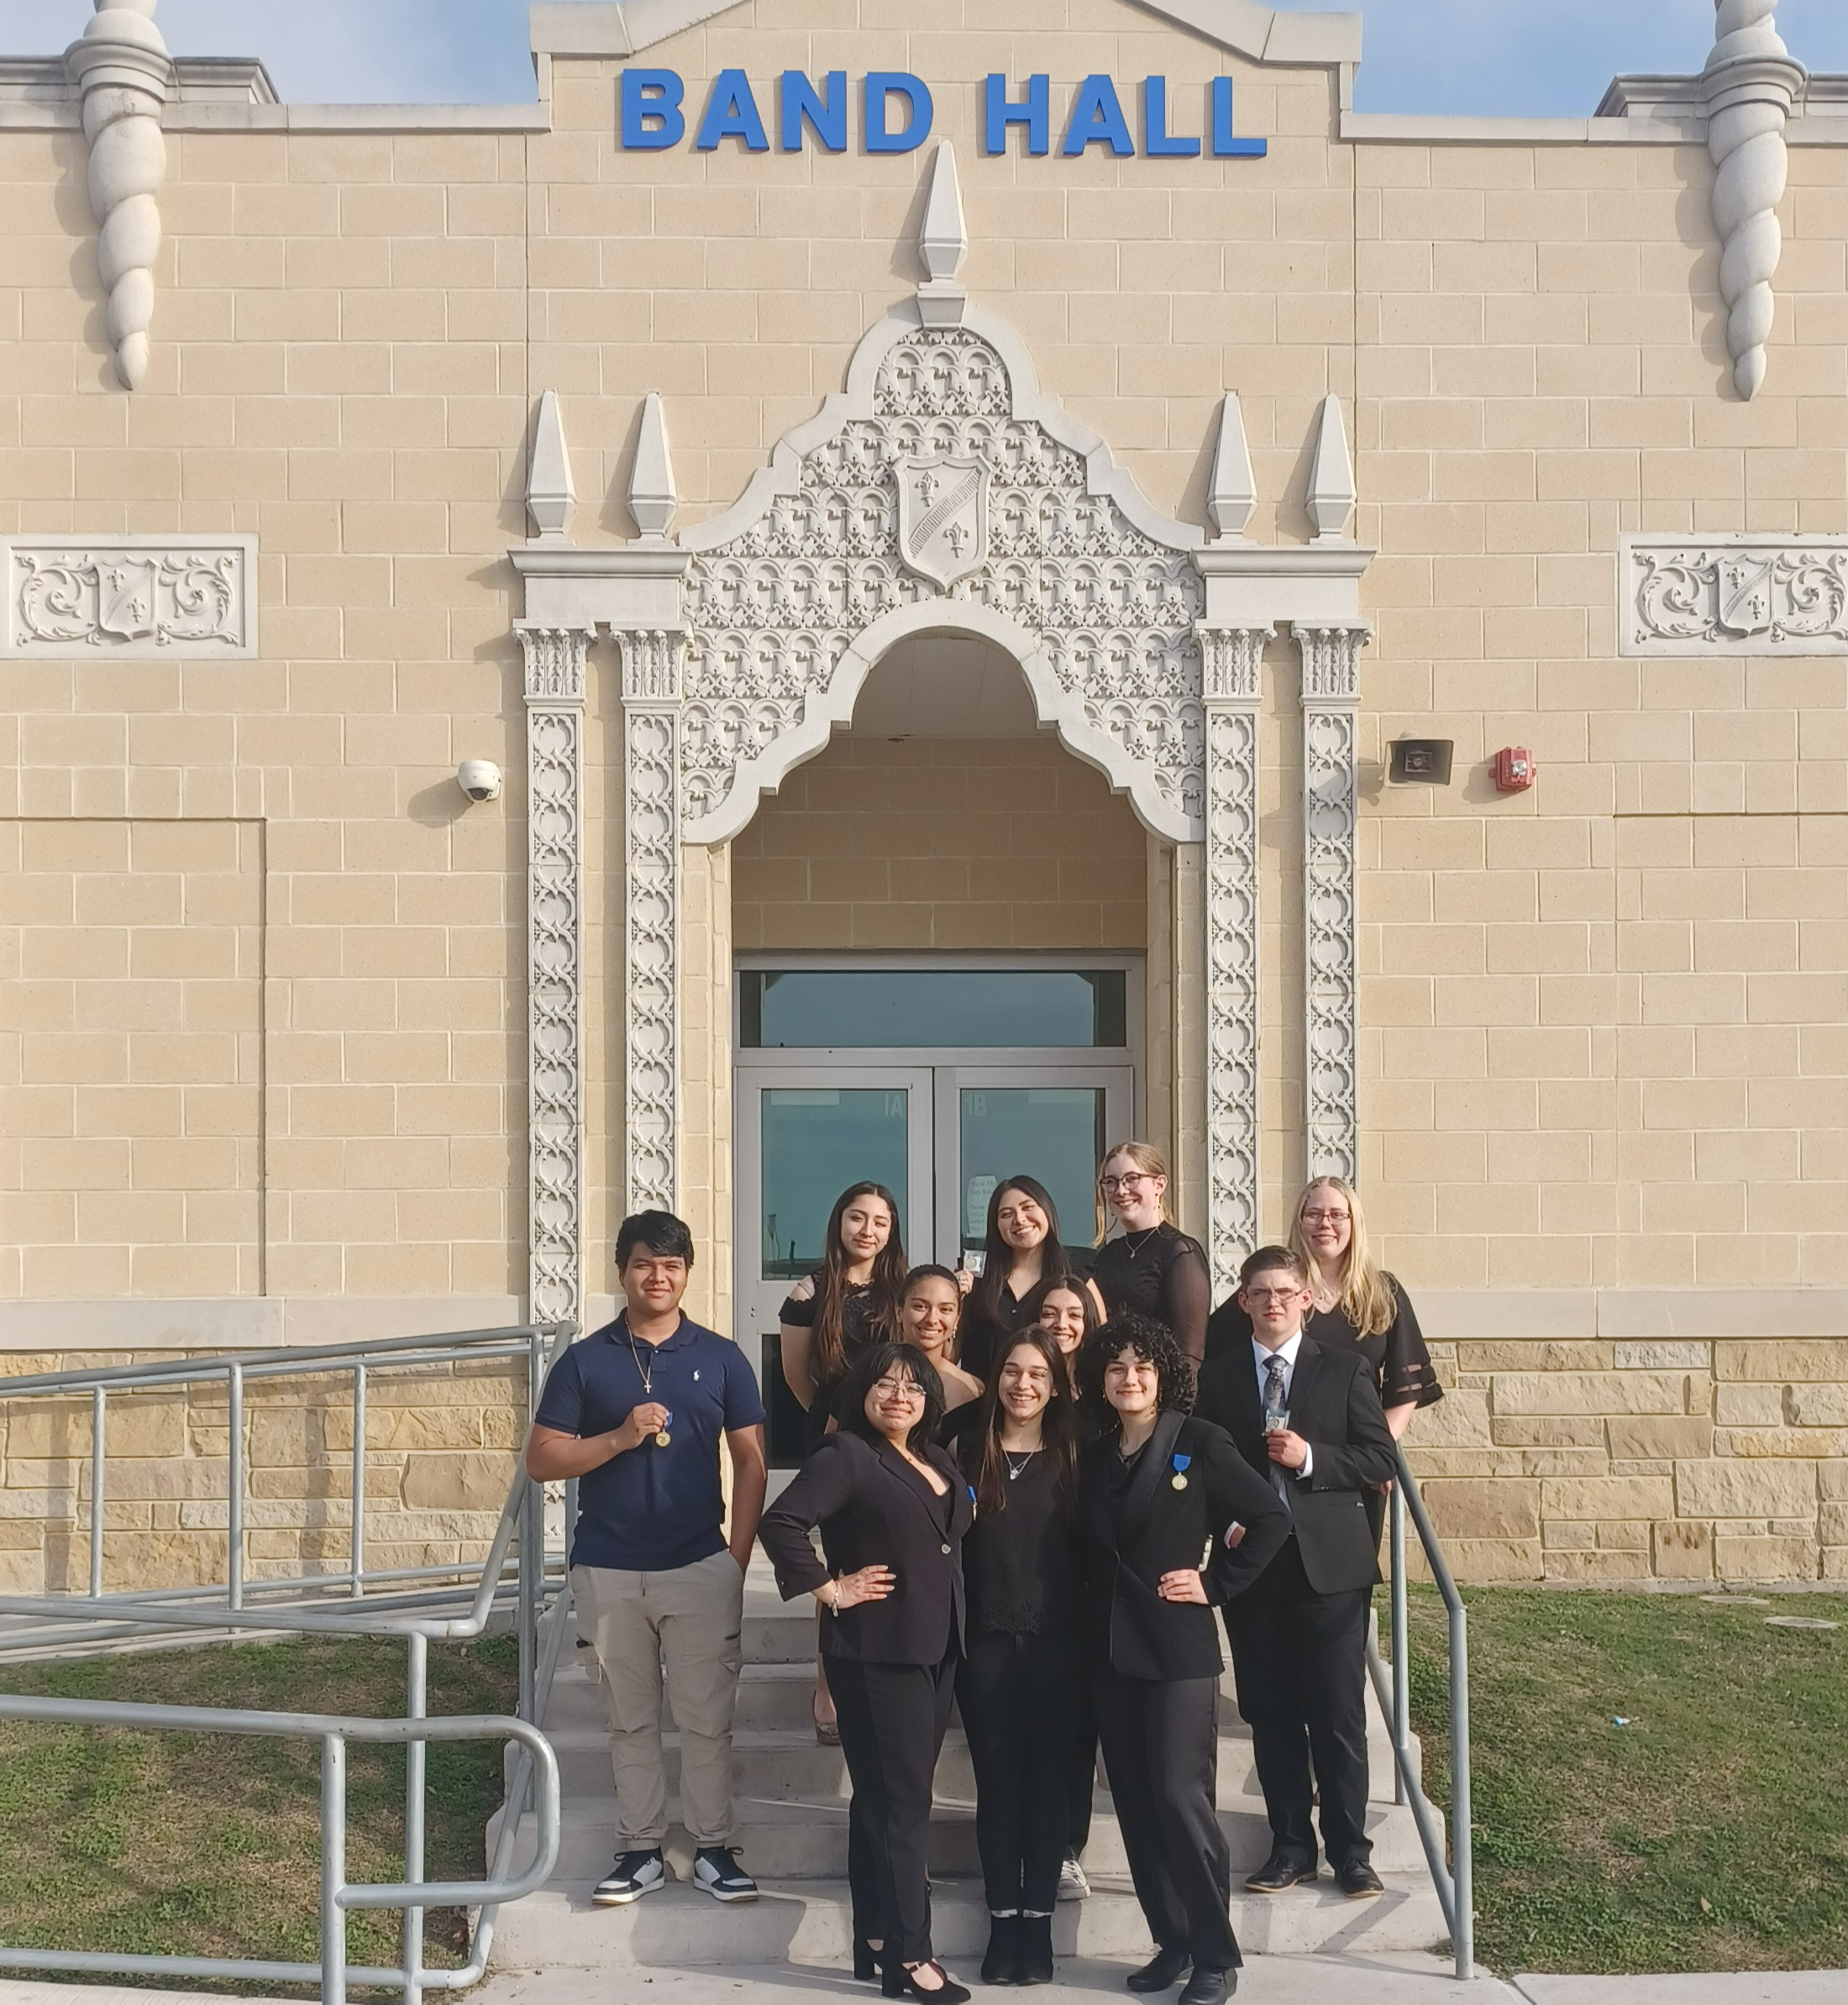 STUDENTS IN FRONT OF BAND HALL